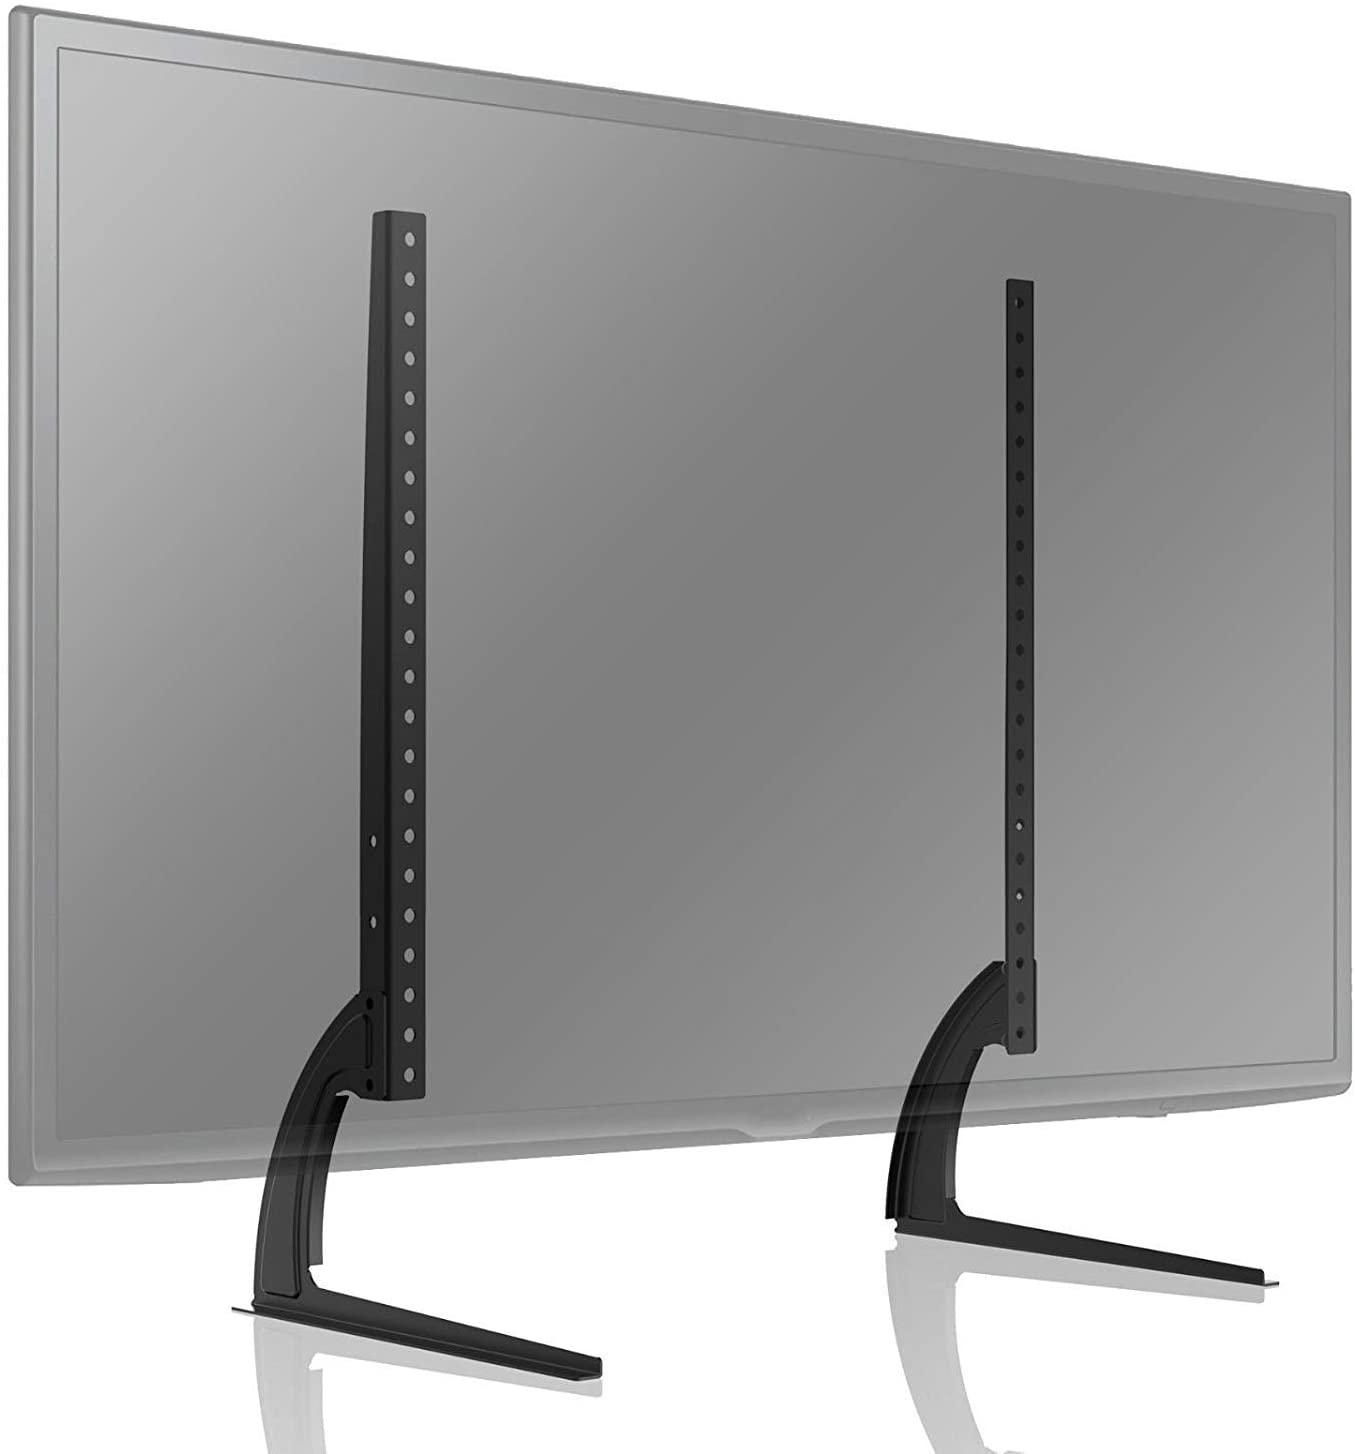 DS BS Universal Table Top TV Stand for Most 27 - 55 inch